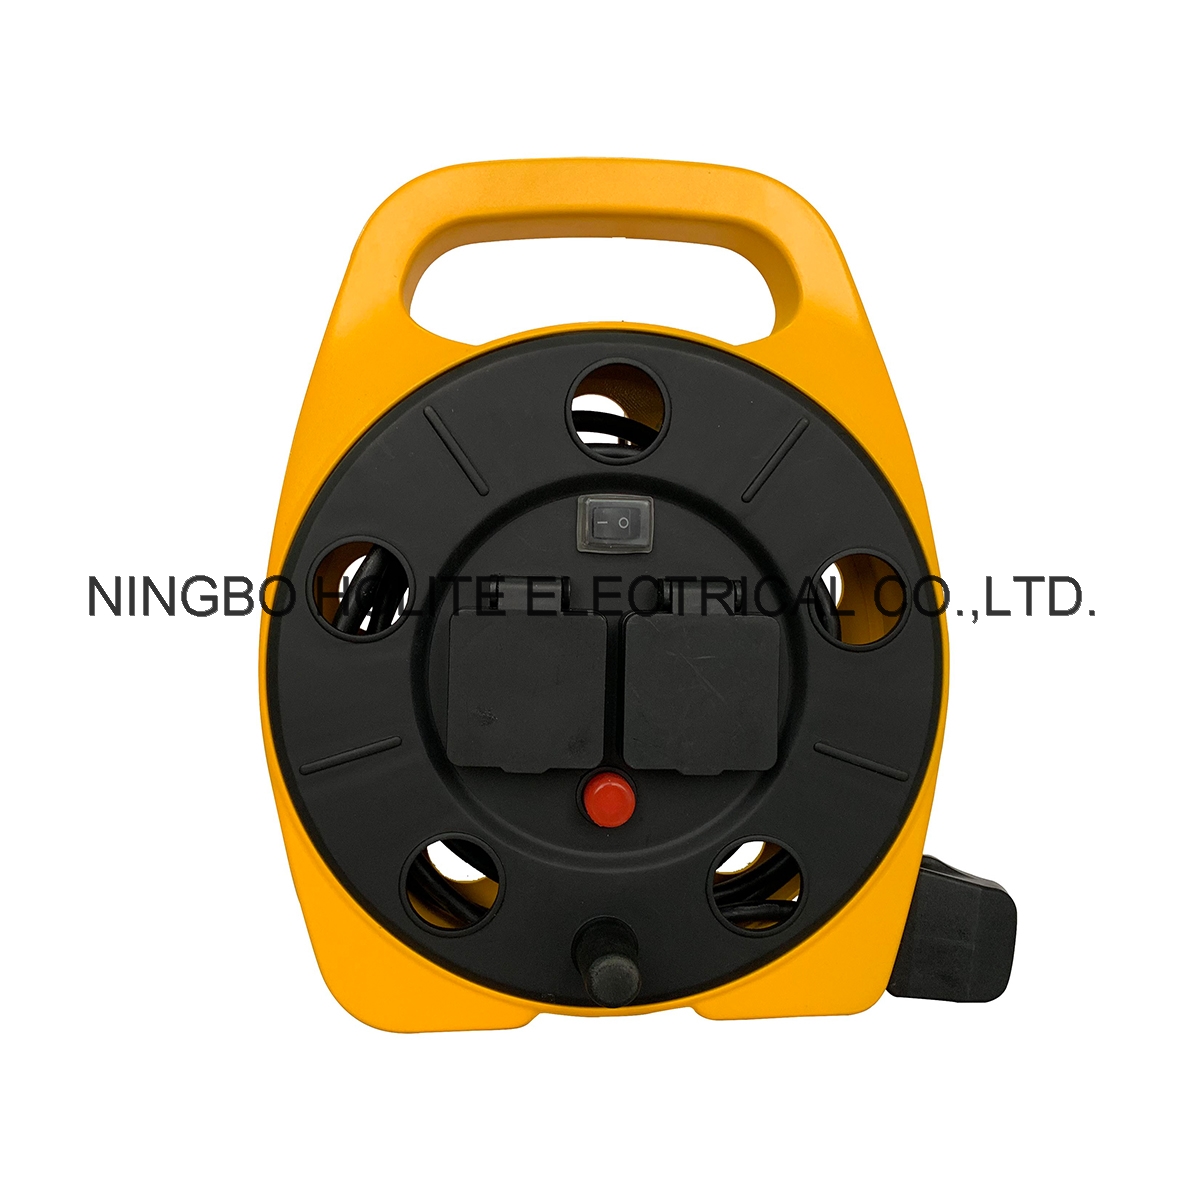 Innovative Multi-function Lighting 10M Cable Reel With LED Light BS Plug Extension Cable